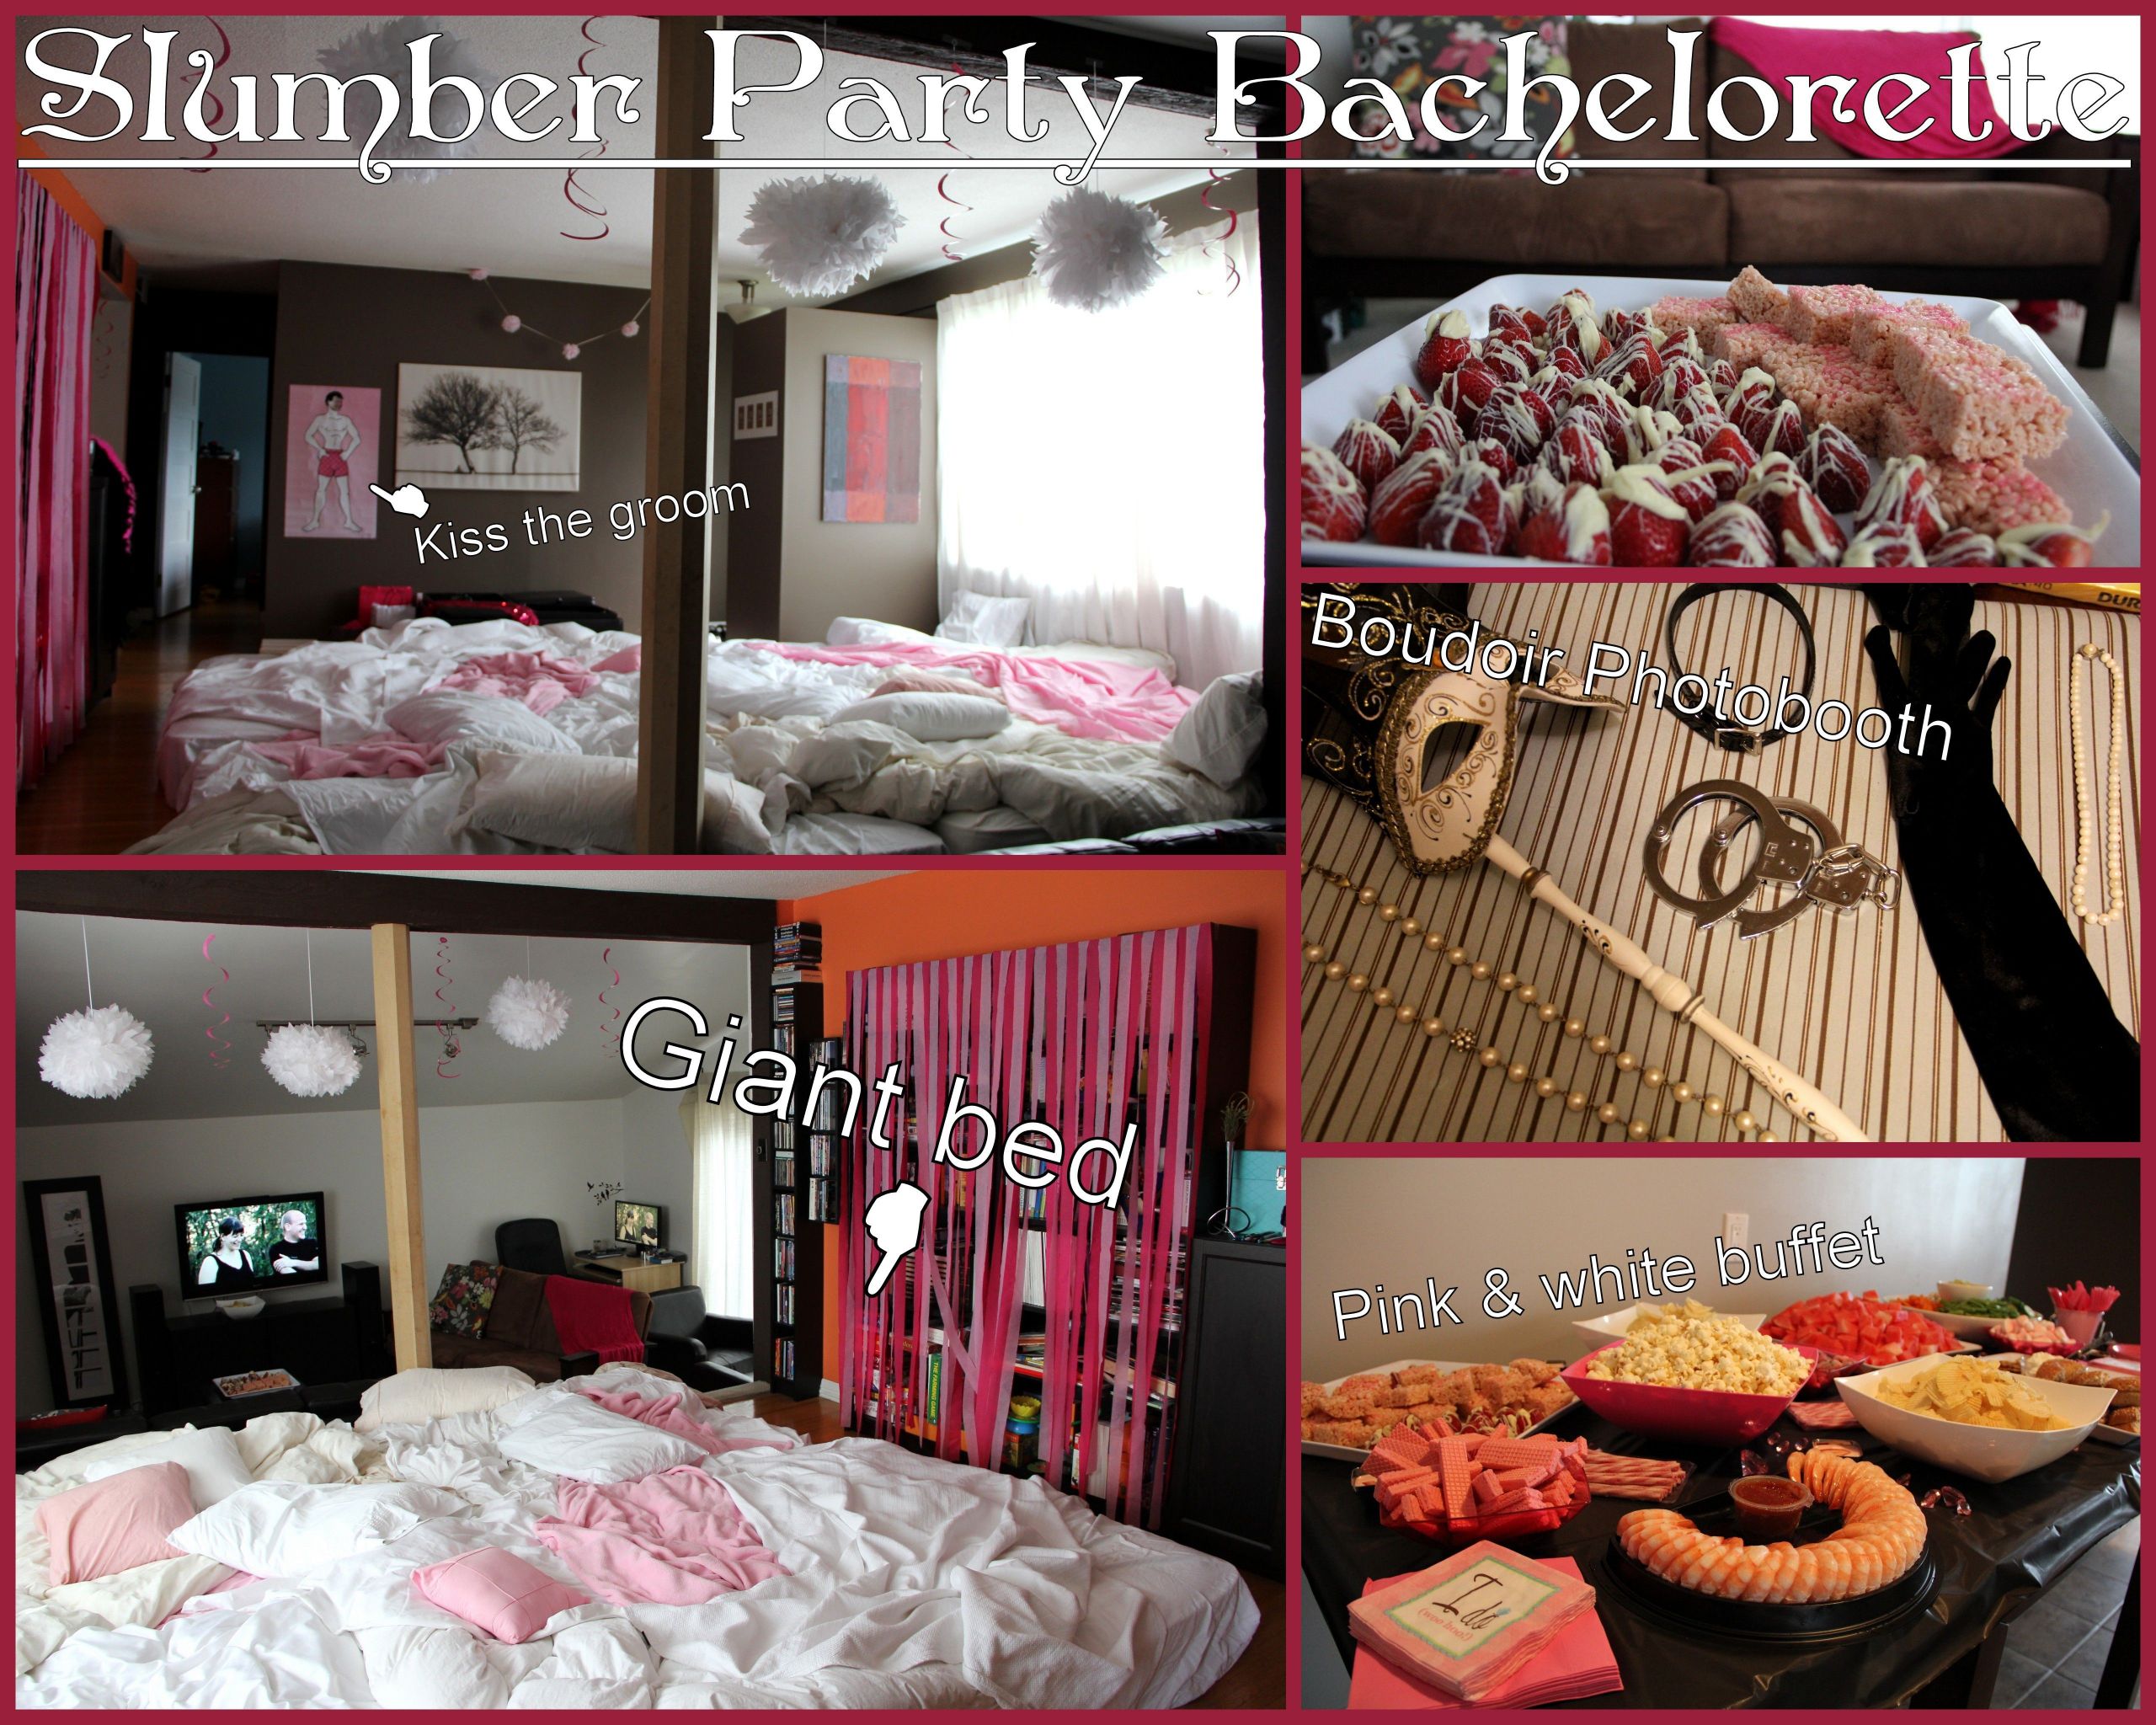 Slumber Party Bachelorette Party Ideas
 Slumber Party Bachelorette I moved all the furniture out